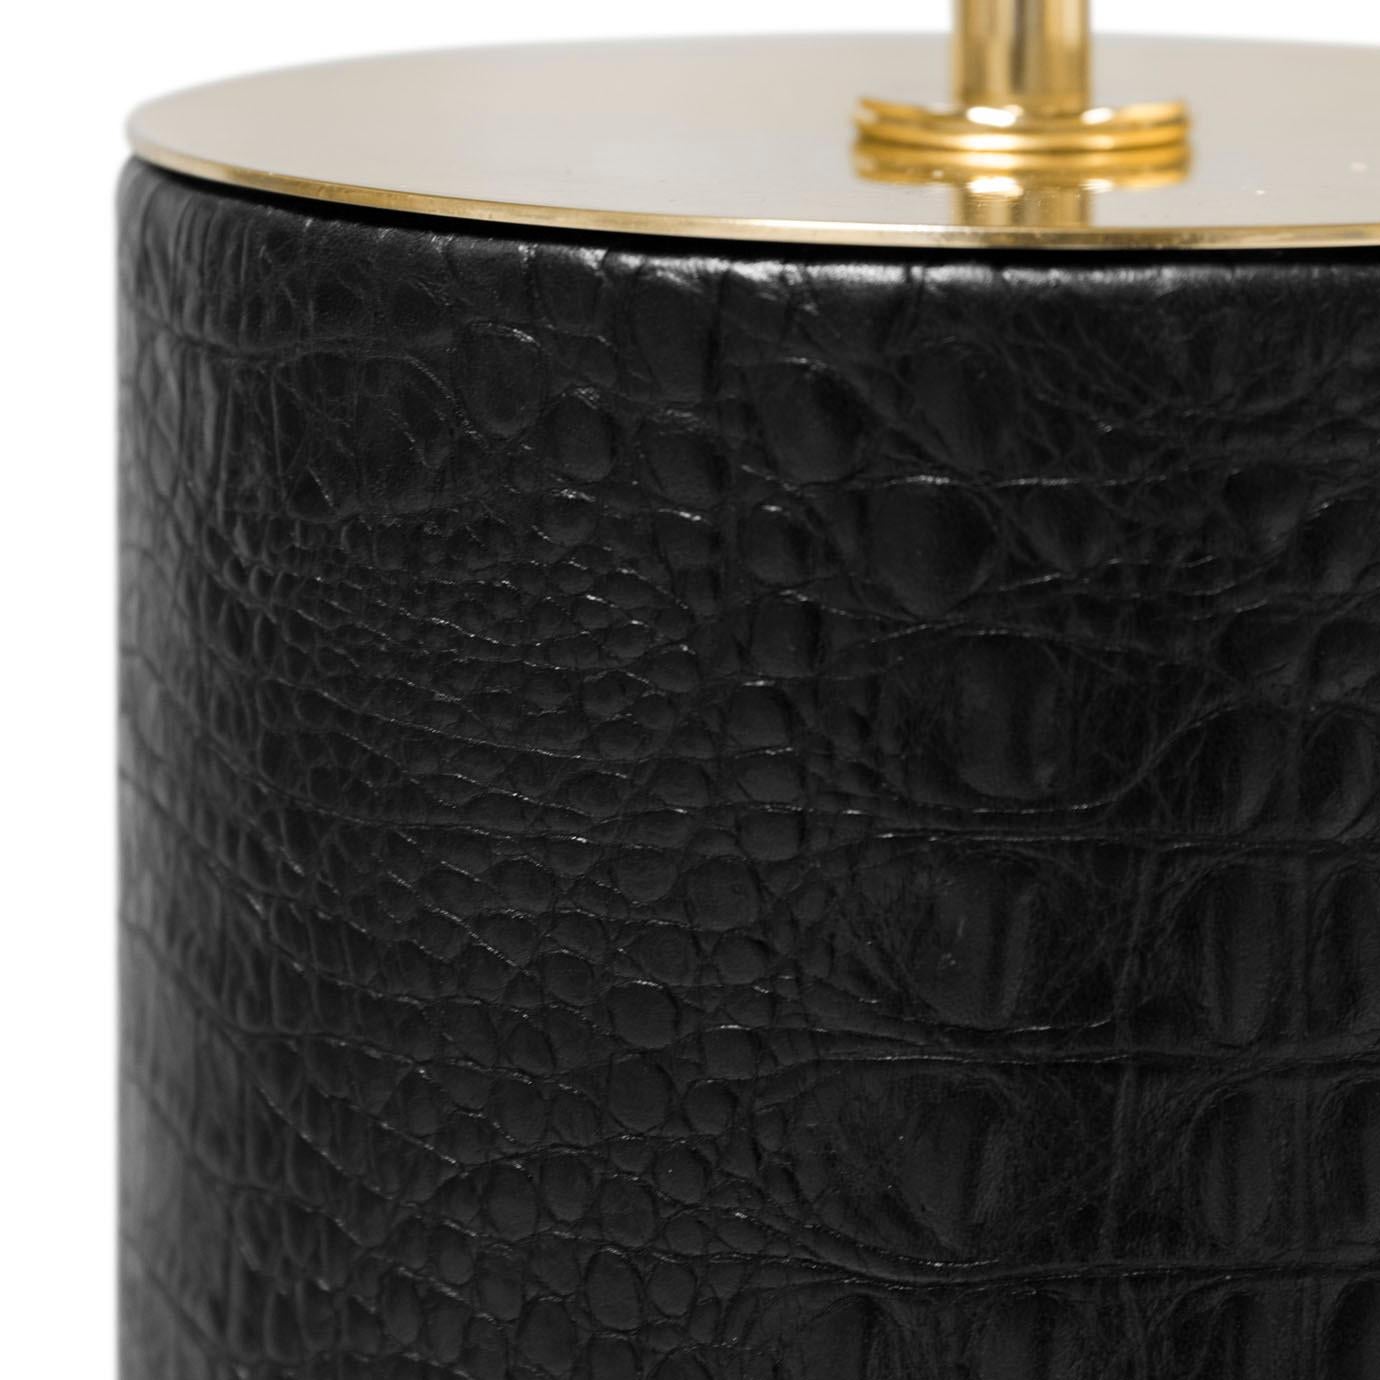 Take a walk on the wild side with the exotic design of the Reptilian Table Lamp. Lavish and wild, the lamp's cylindrical body is opulently wrapped in sumptuous leather while two seductively silent, hand-carved crocodiles curve around the marble